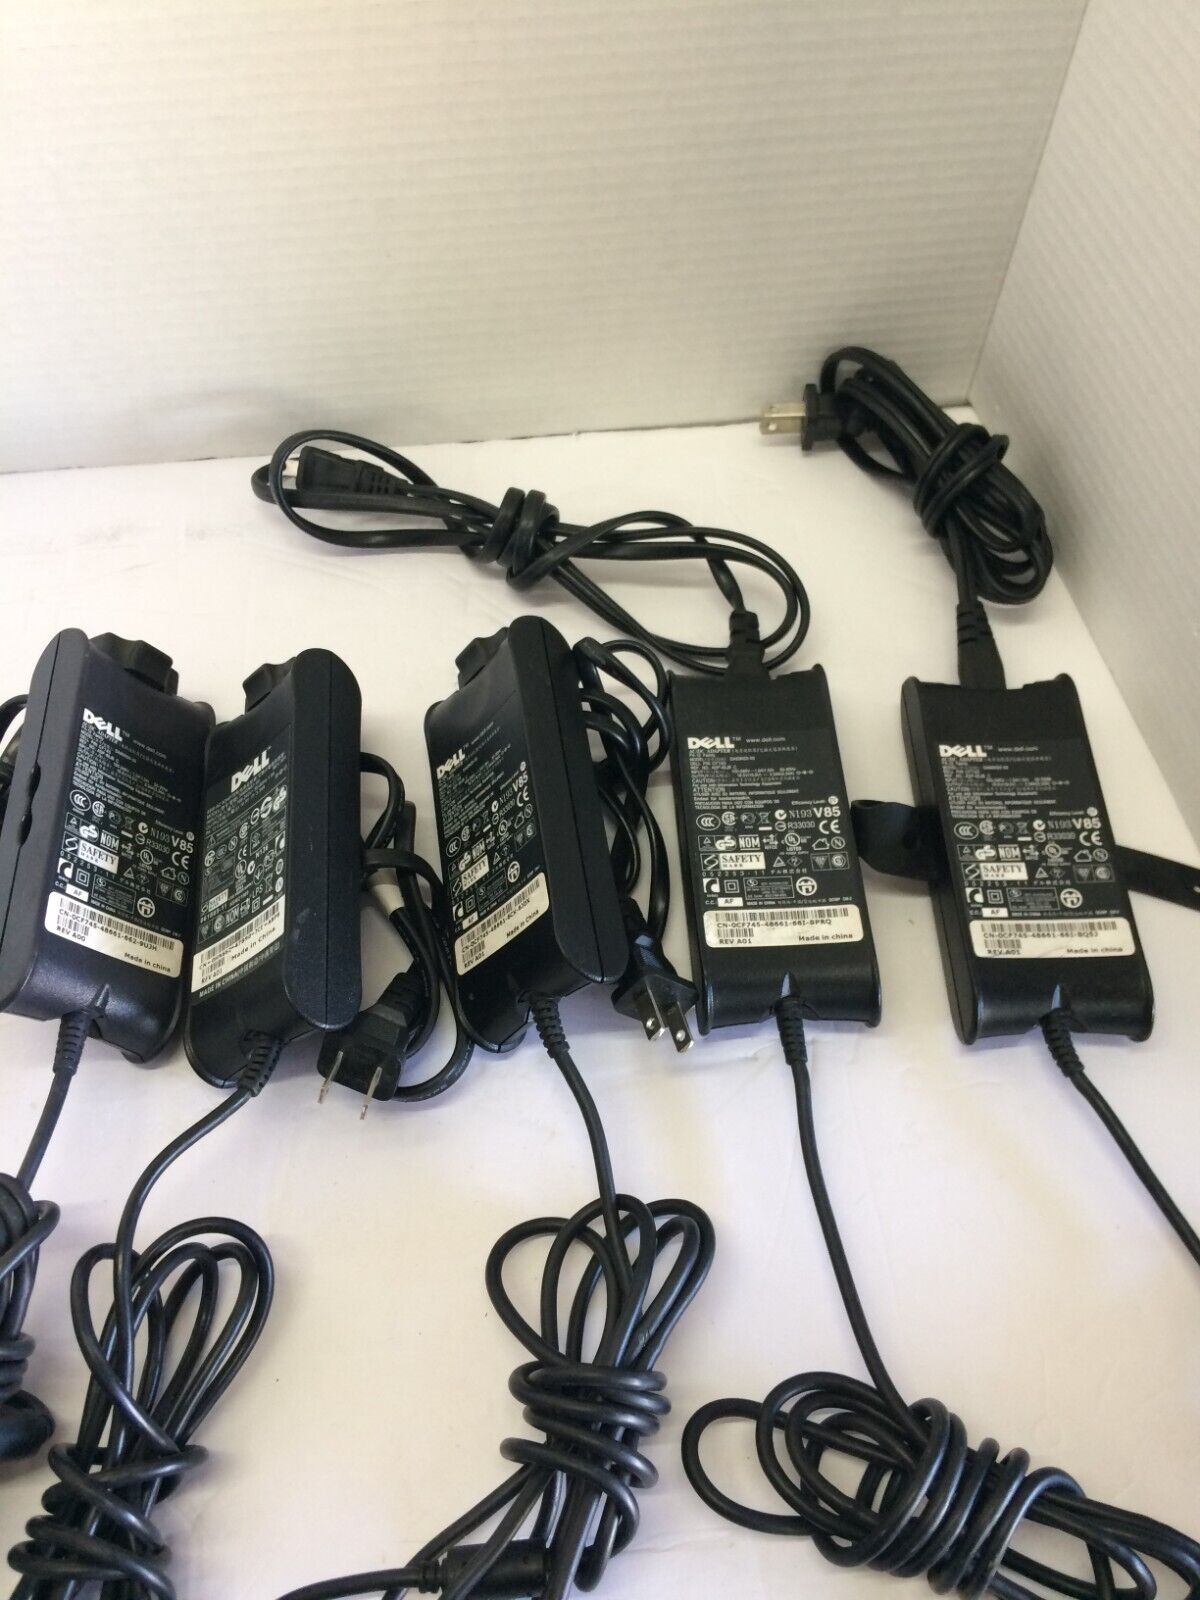 Dell power supply lot of five PA12 FAMILY